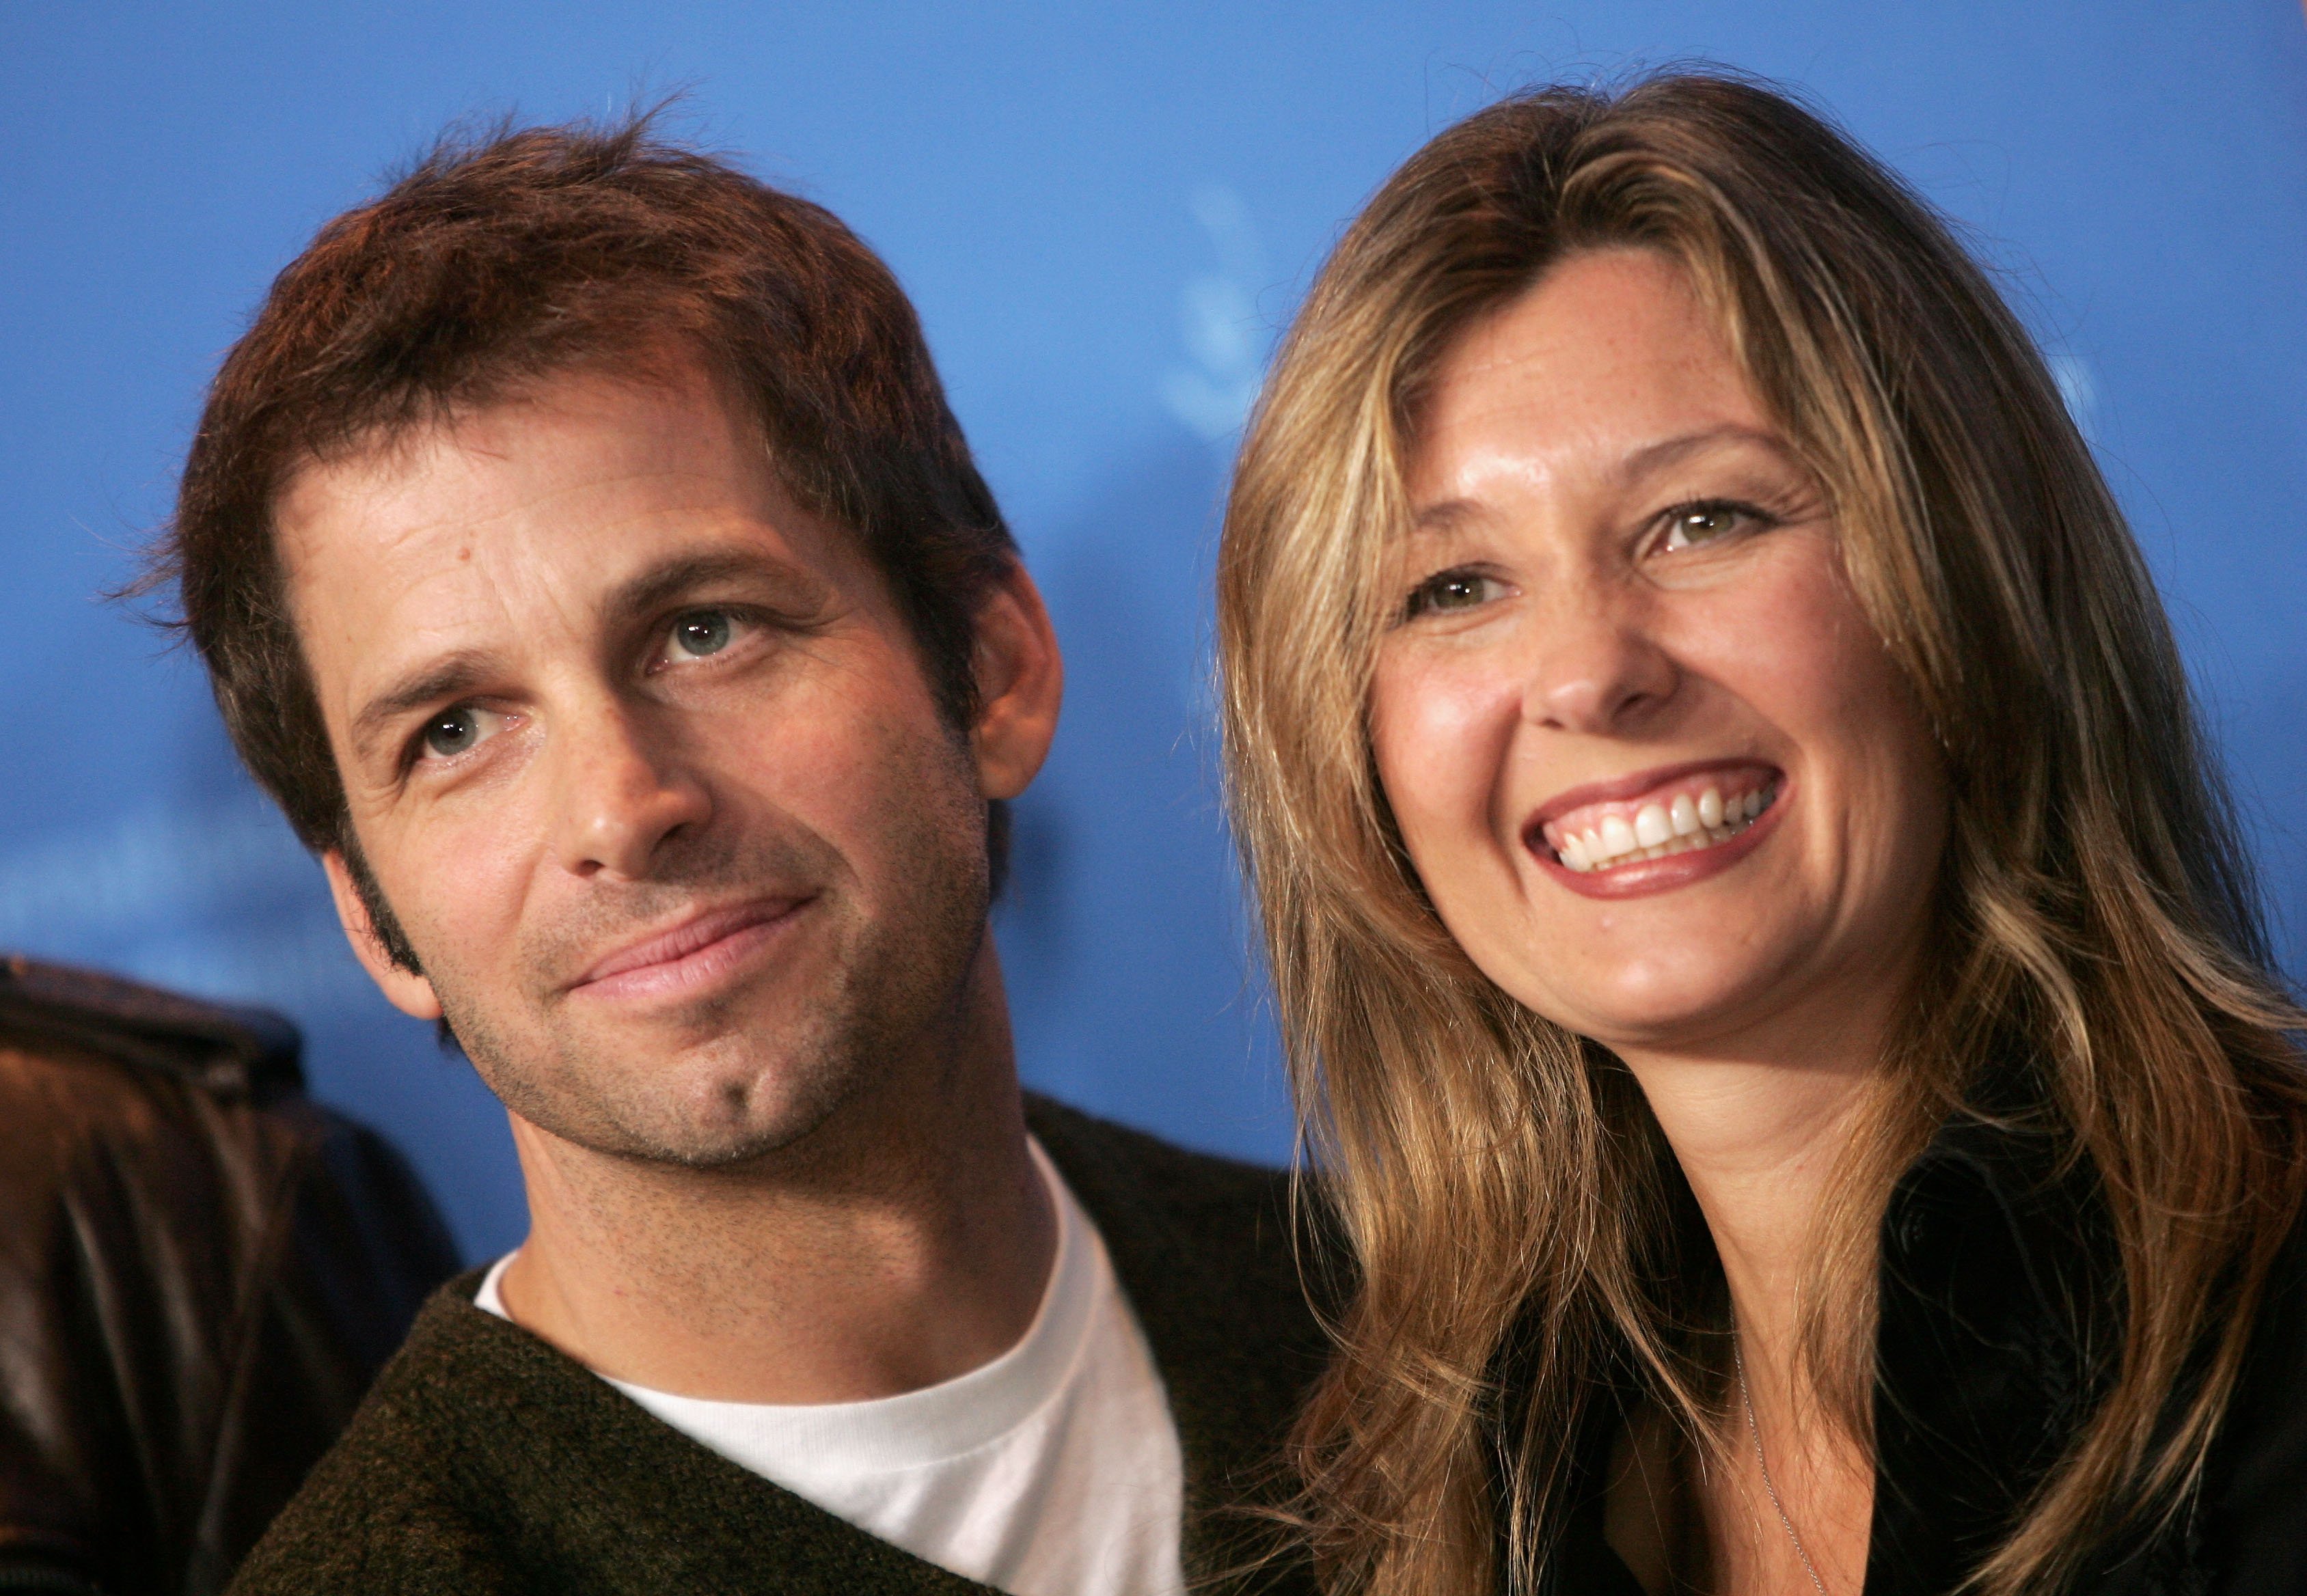 Zack Snyder and Deborah Snyder in Berlin, Germany on February 14, 2007 | Source: Getty Images